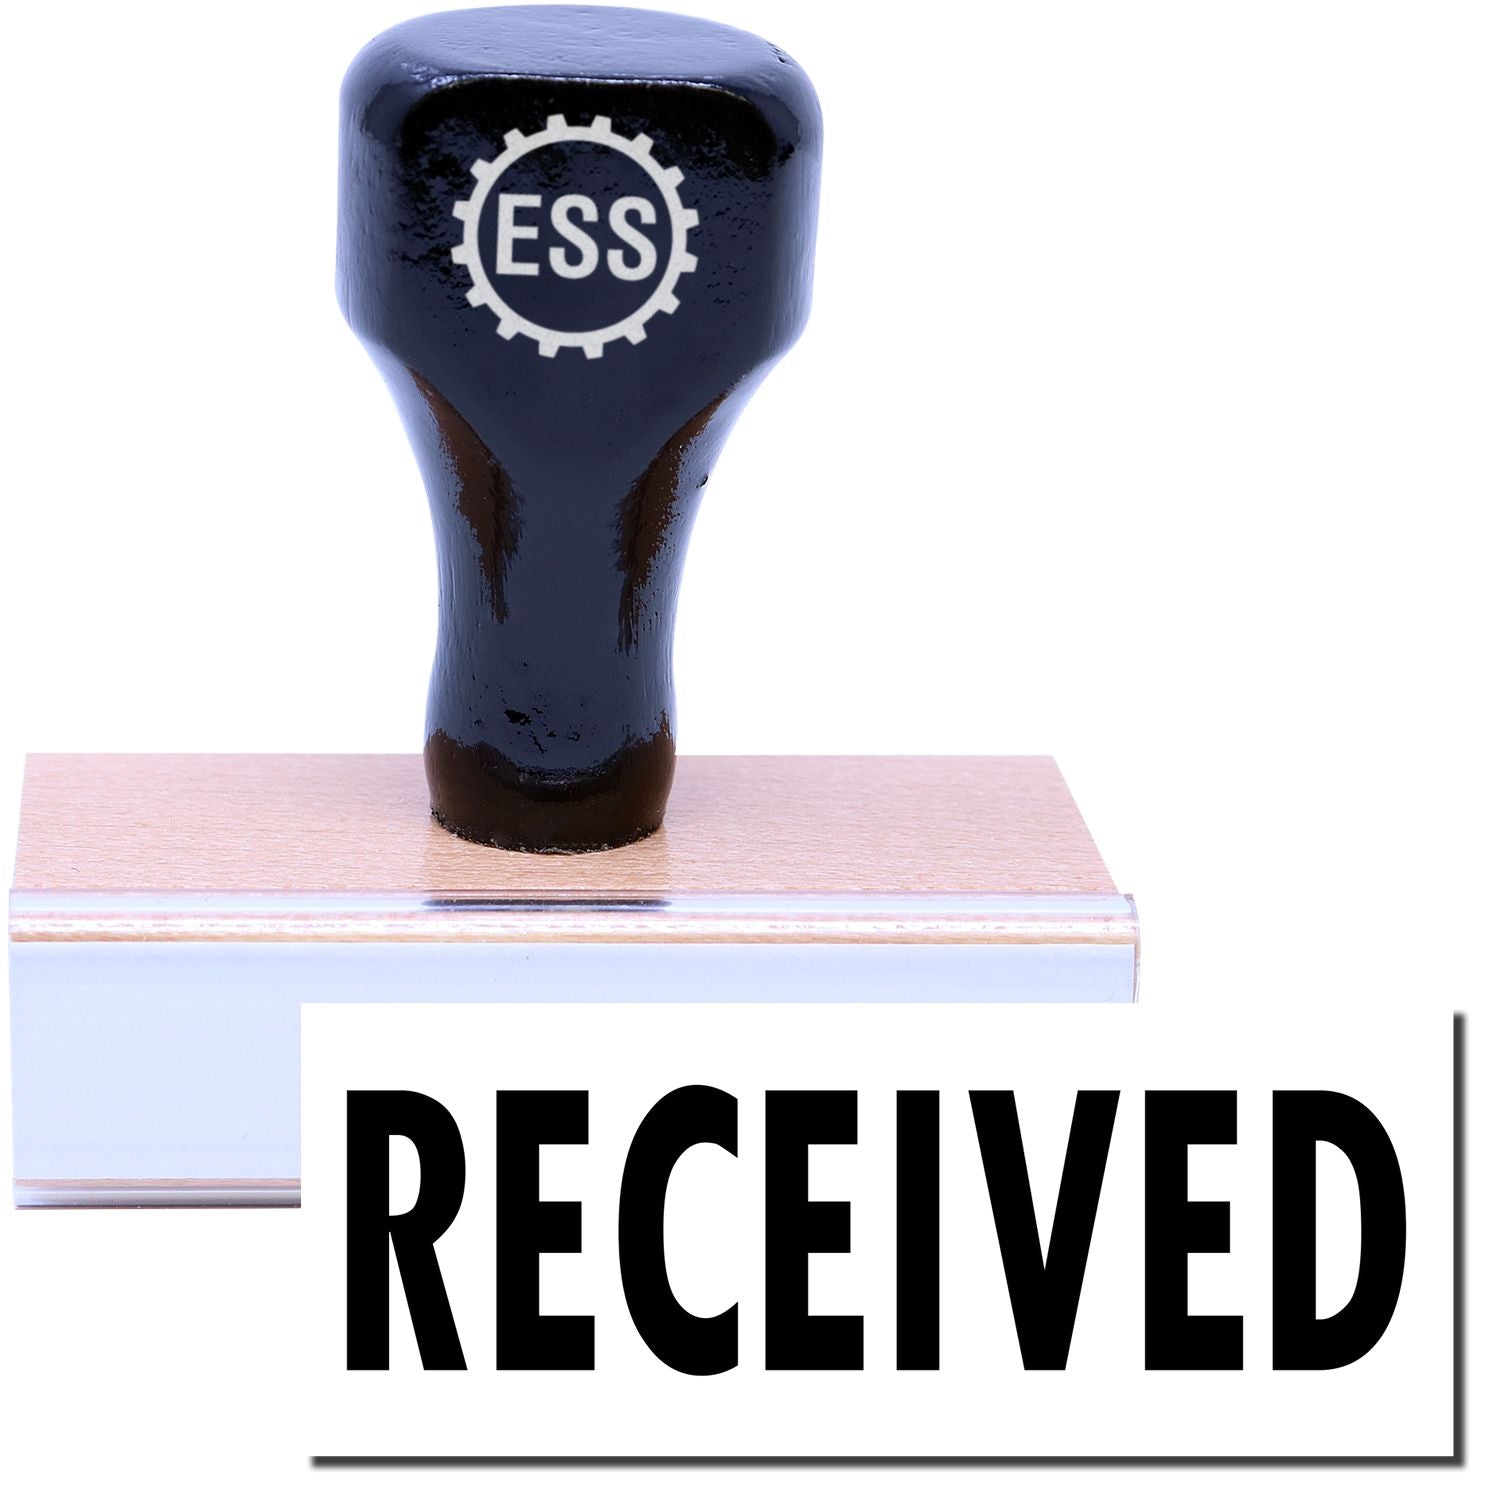 A stock office rubber stamp with a stamped image showing how the text "RECEIVED" is displayed after stamping.